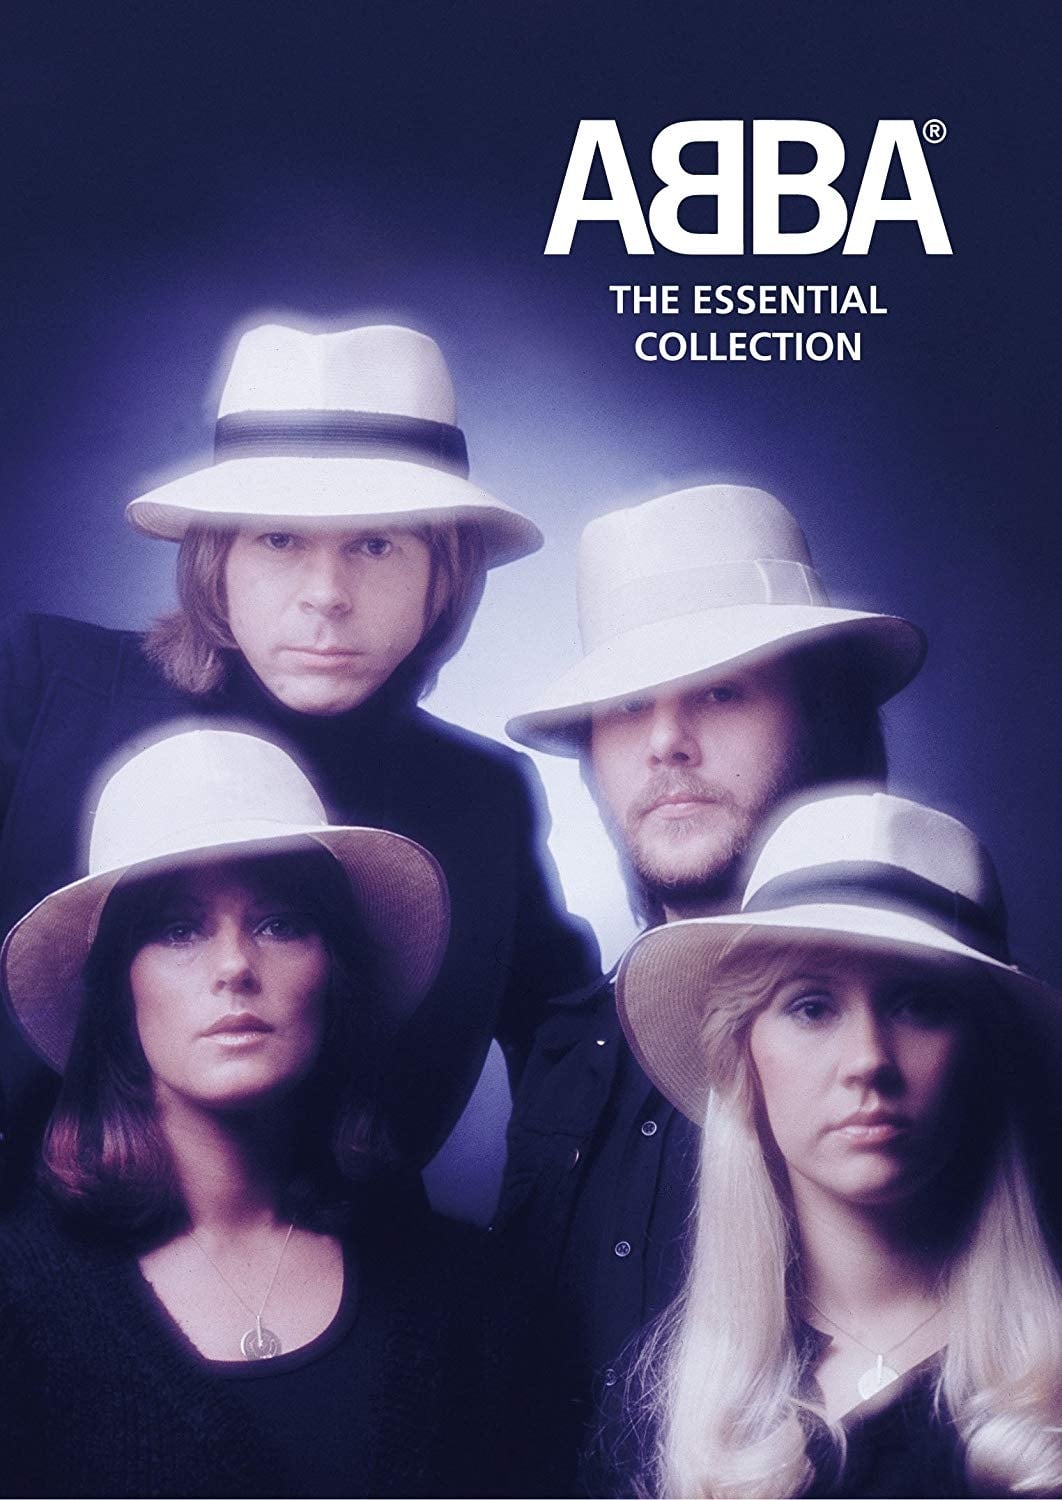 ABBA: The Essential Collection